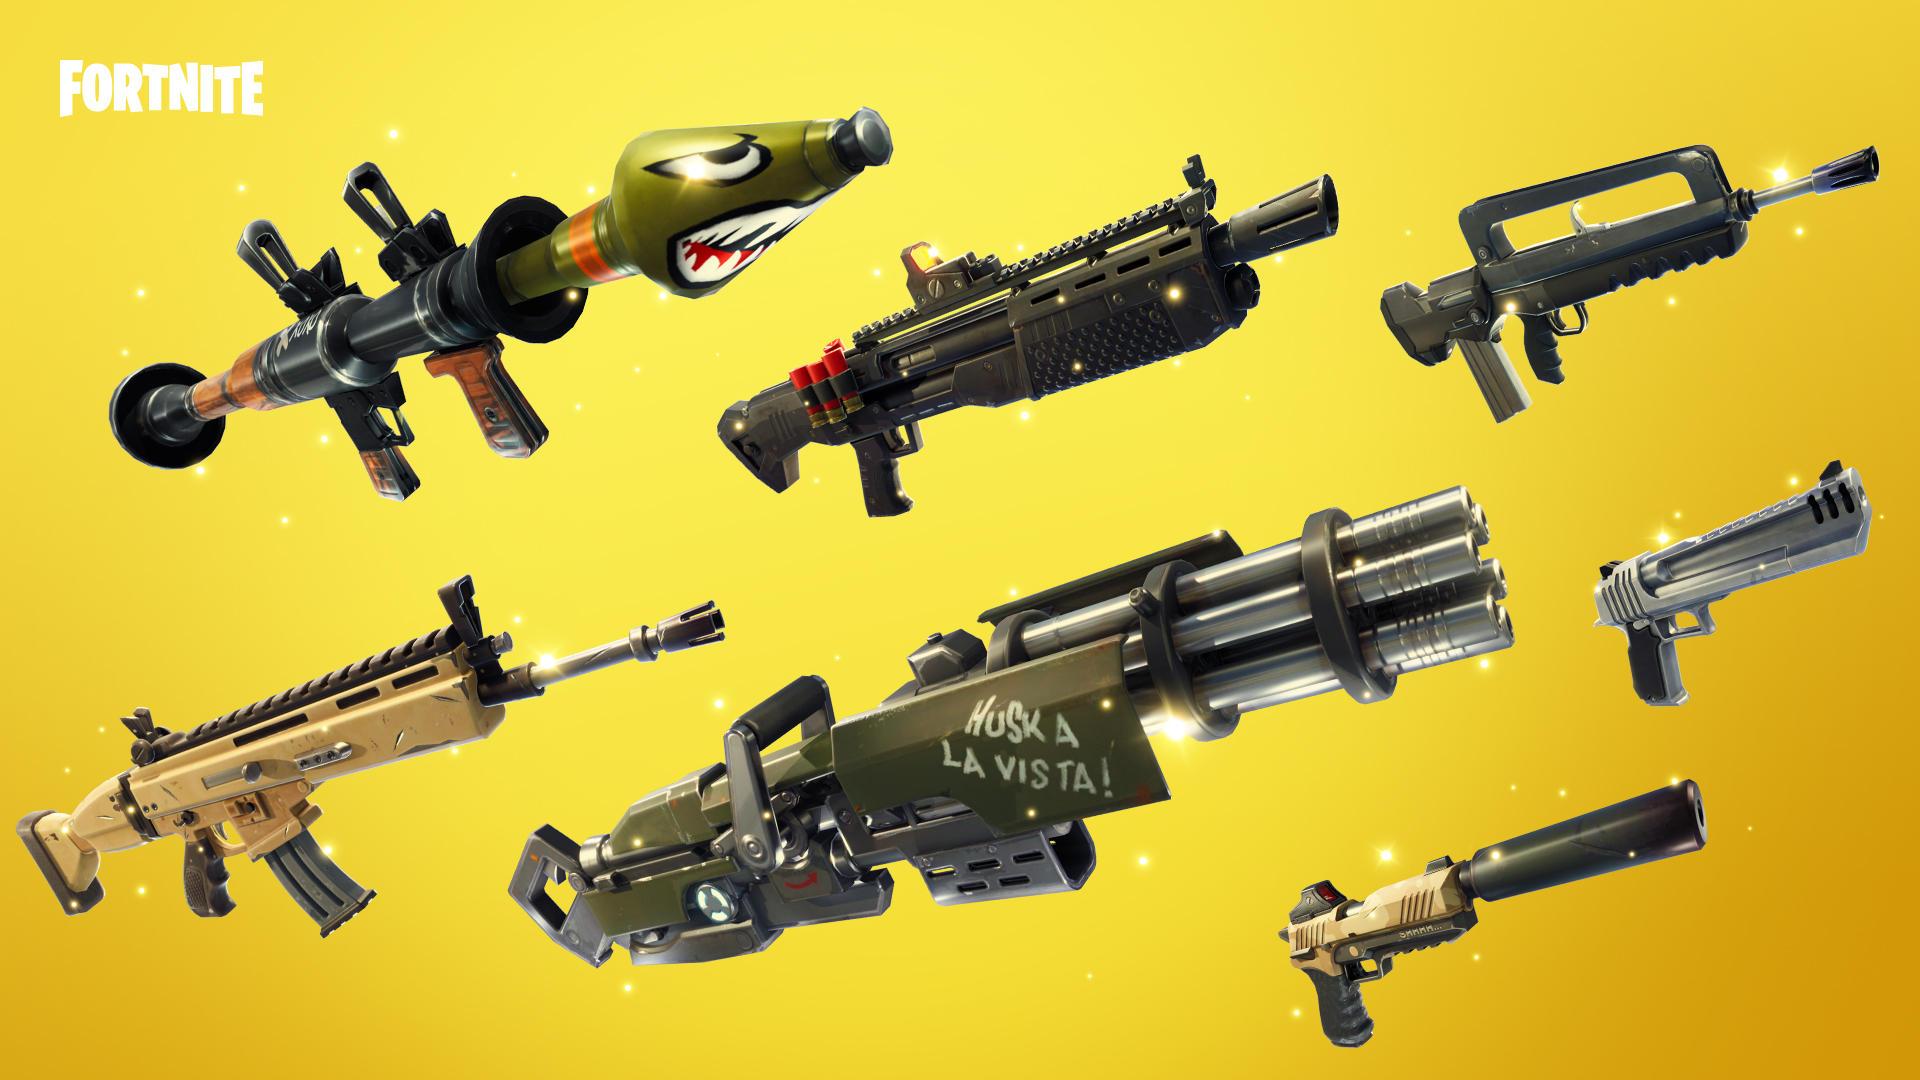 New Heavy Sniper Coming Soon to Fortnite Battle Royale